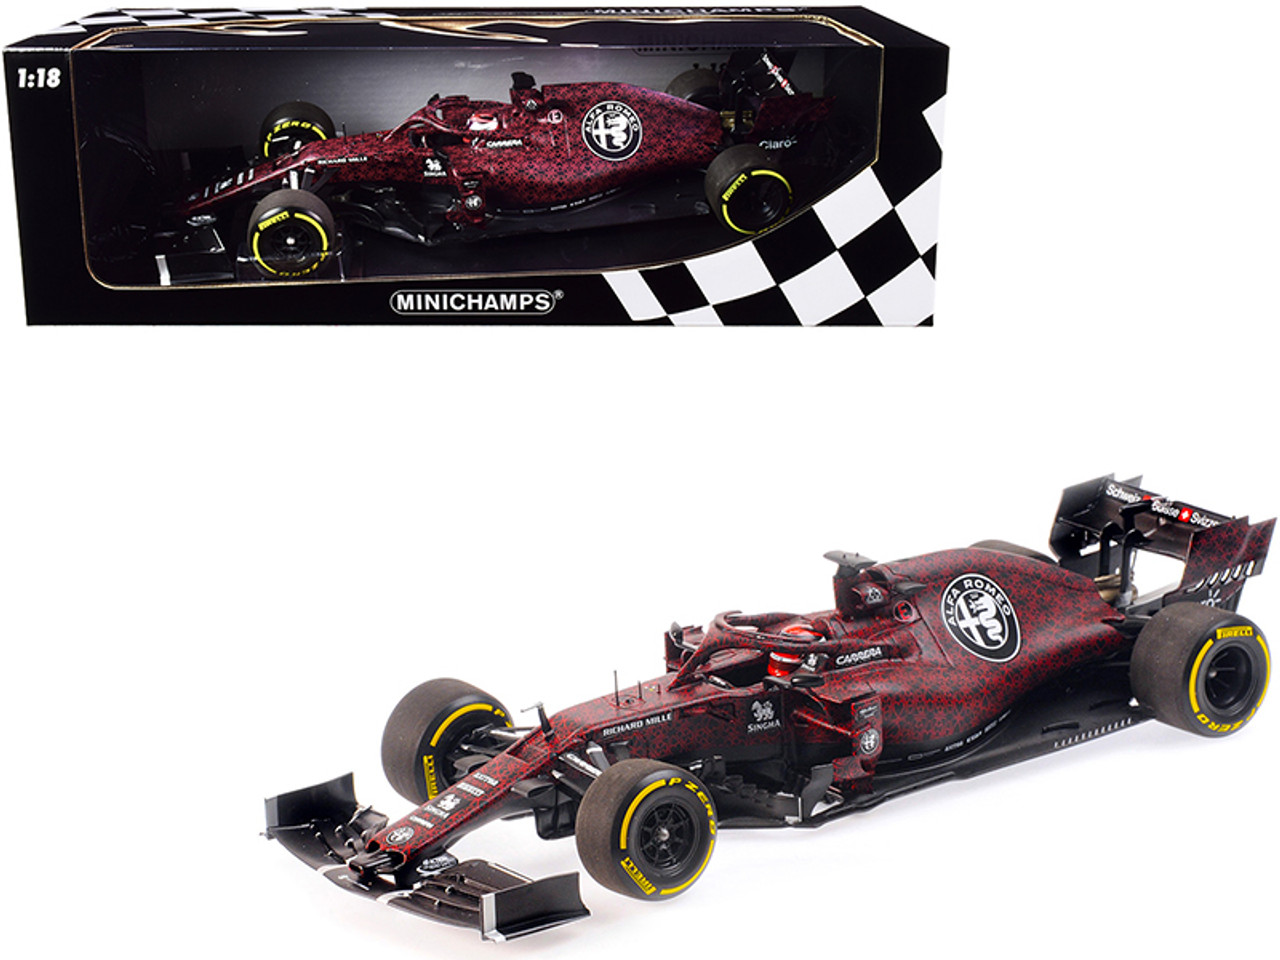 Alfa Romeo Racing C38 Kimi Raikkonen Valentine's Day Livery Shakedown in Fiorano 14th February, 2019 (Formula One Racing Car) Limited Edition to 702 pieces Worldwide 1/18 Diecast Model Car by Minichamps